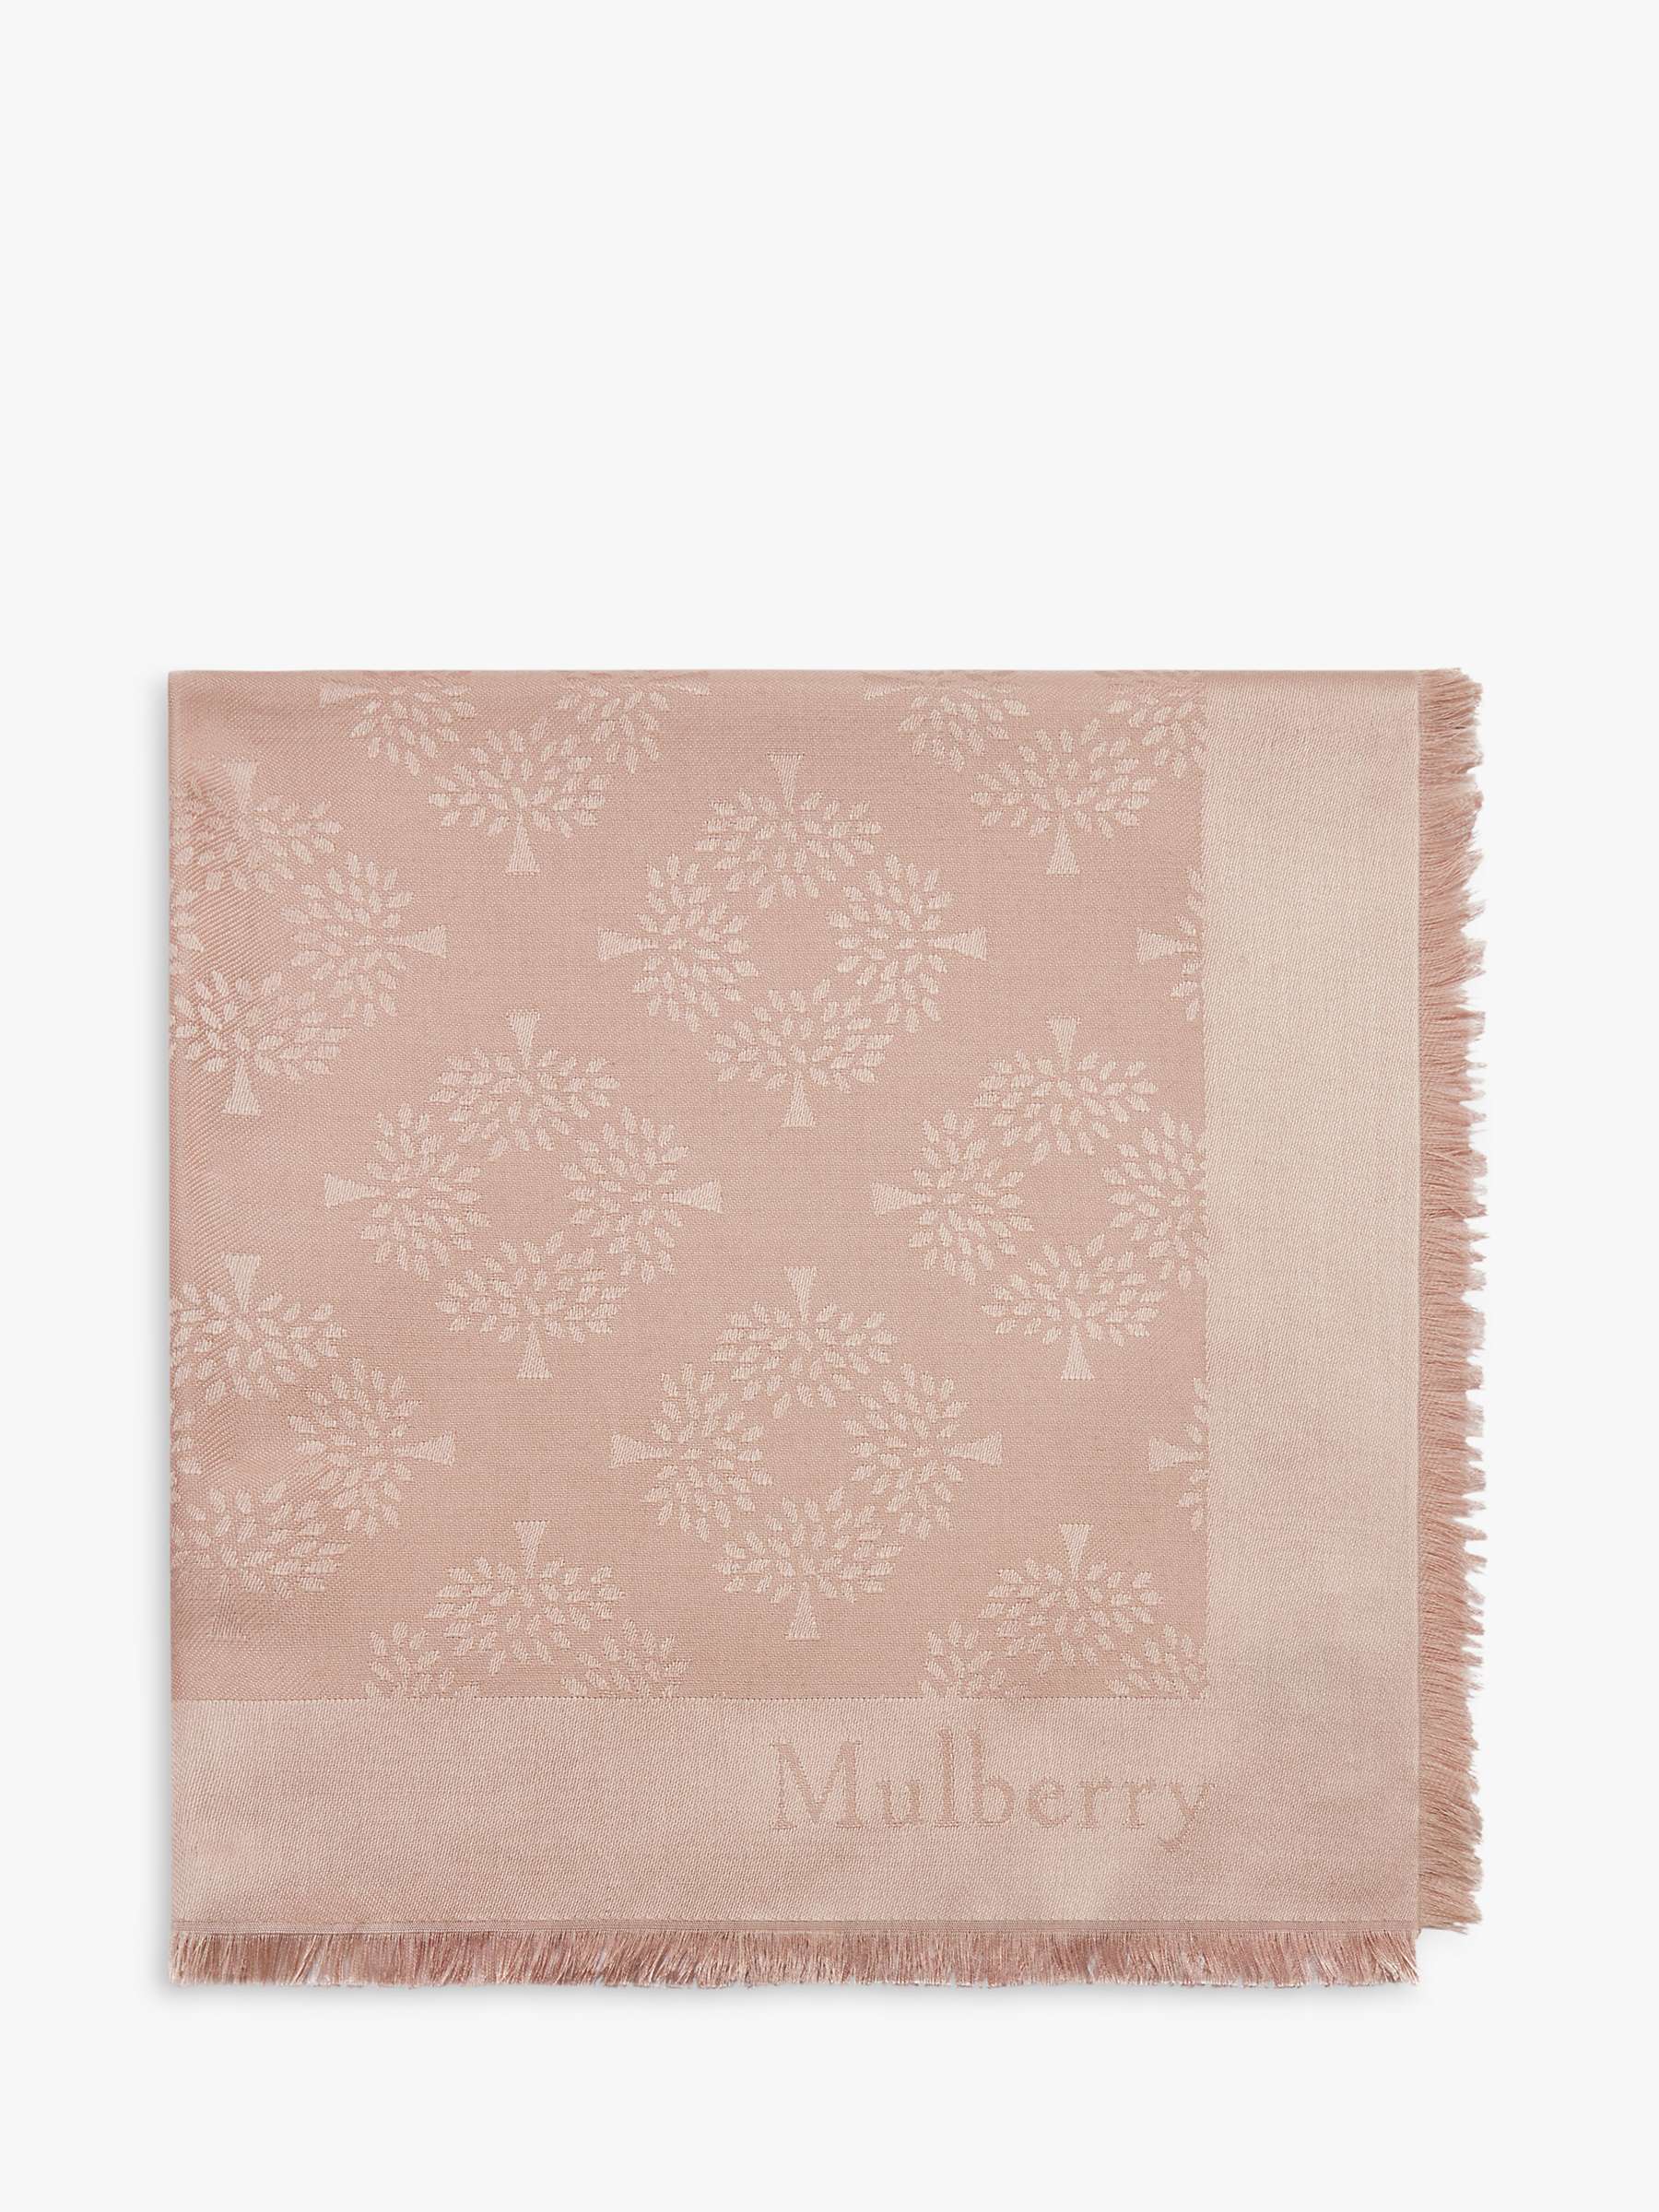 Buy Mulberry Tree Silk Cotton Square Scarf Online at johnlewis.com